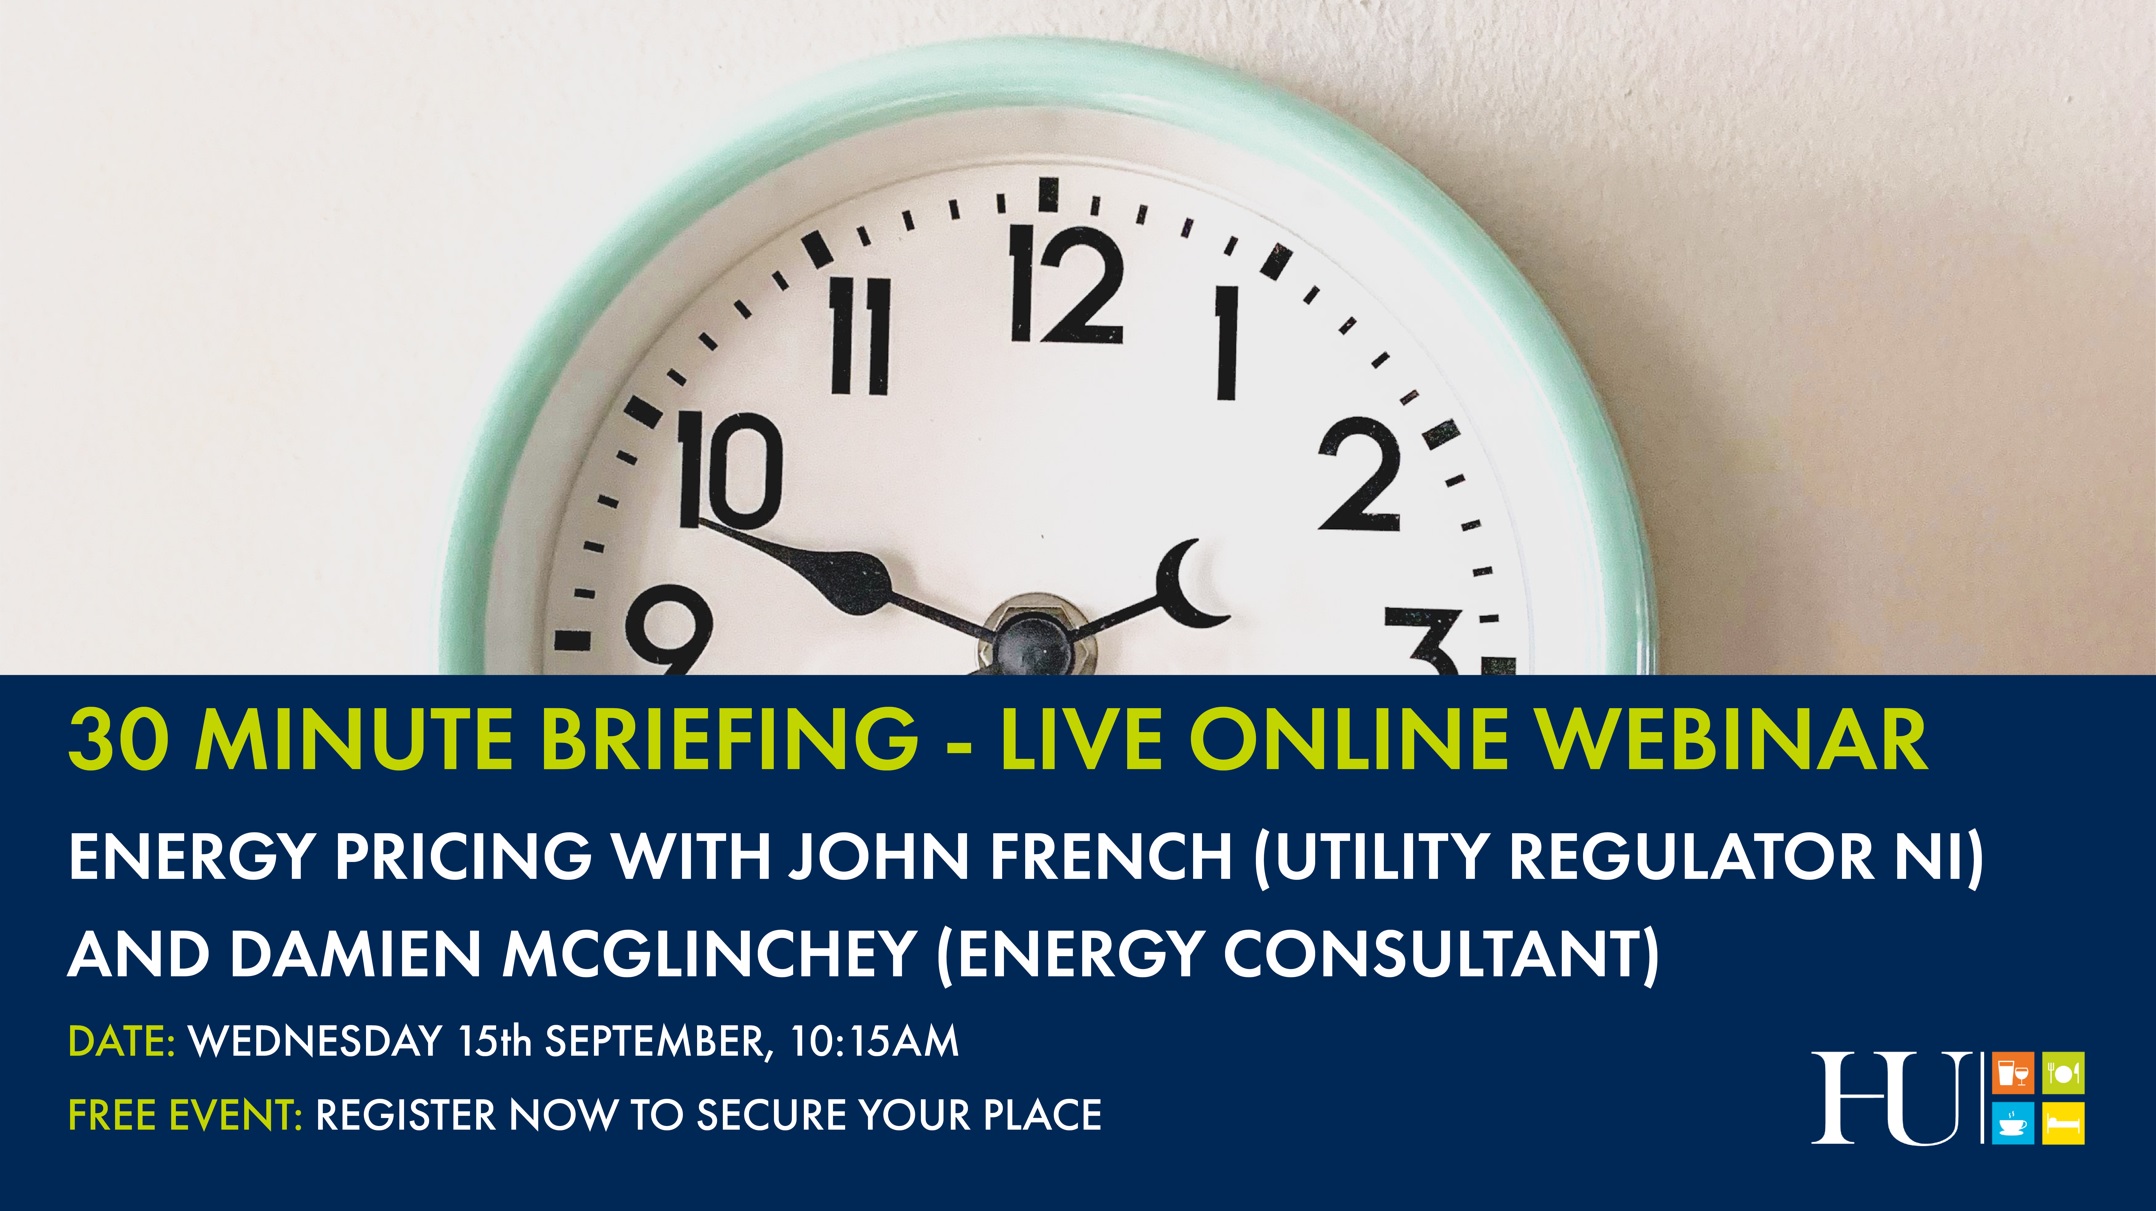 30 MINUTE BRIEFING - ENERGY PRICING - REGISTER NOW